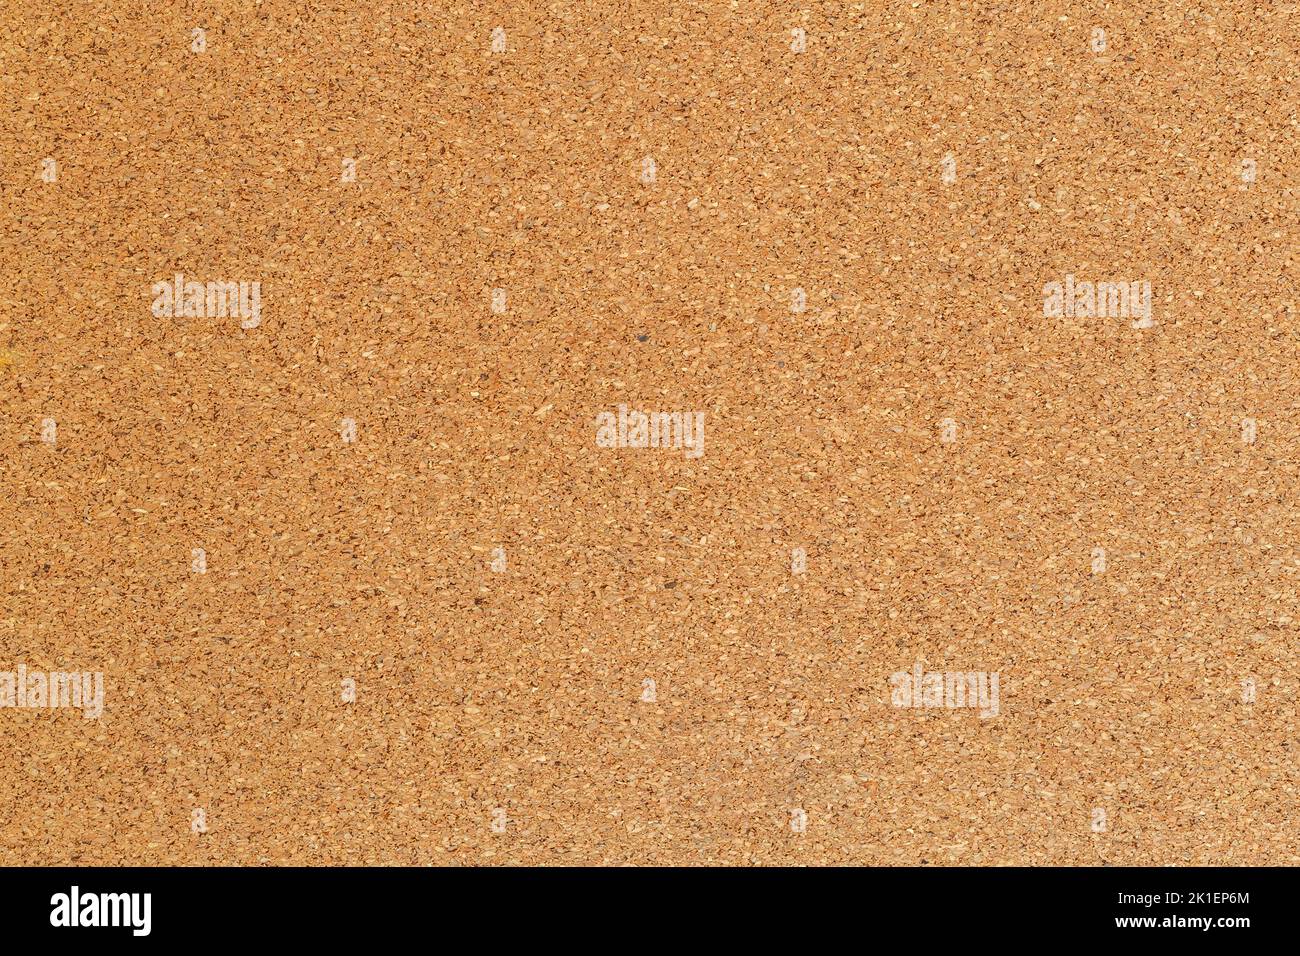 close up of brown cork board texture Stock Photo